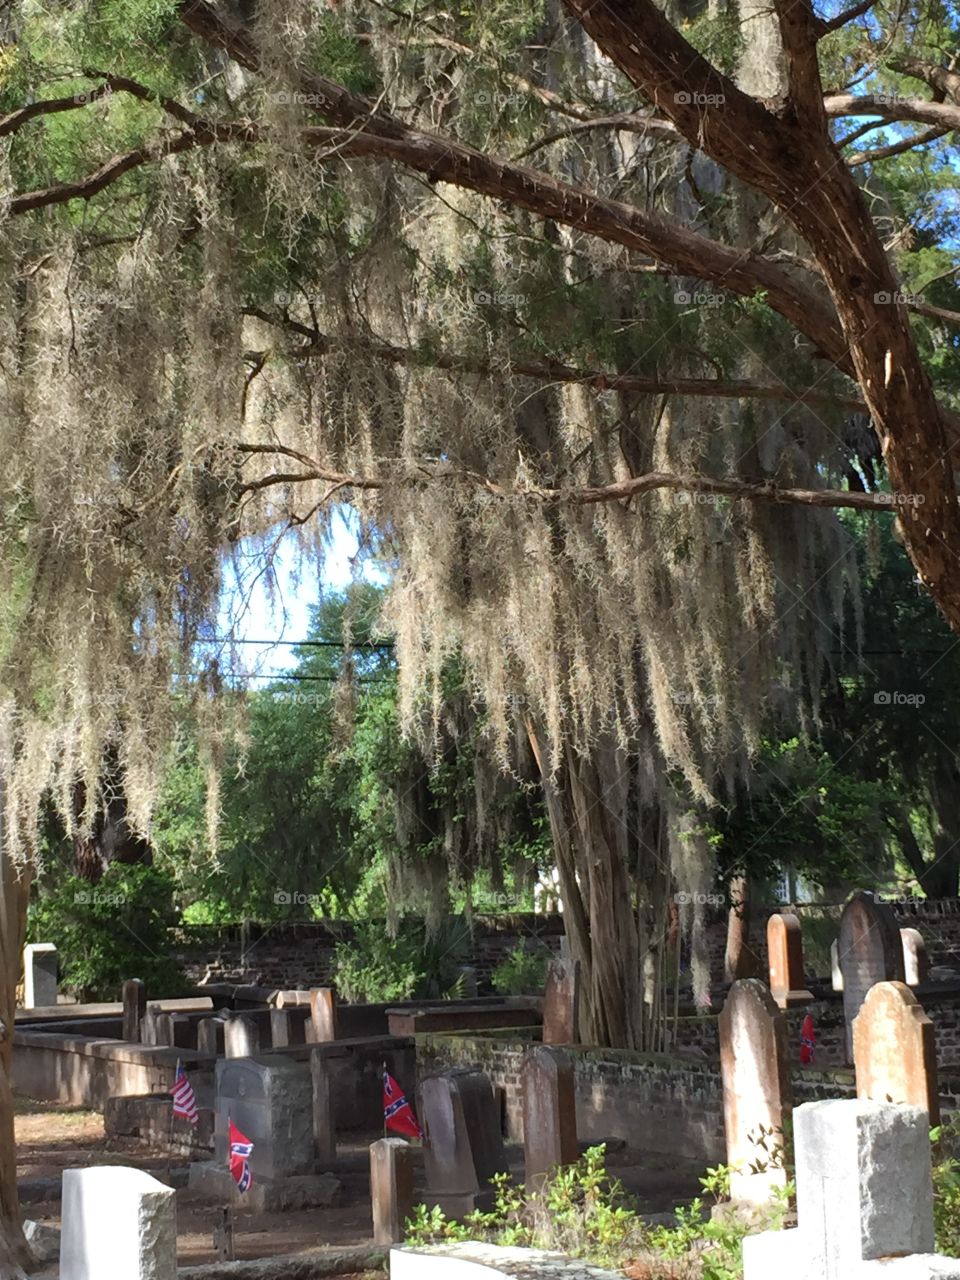 Deep South Confederate Cemrtery. Historic Confederate cemetery with pre war tombstones and Spanish Moss covered trees in South Carolina